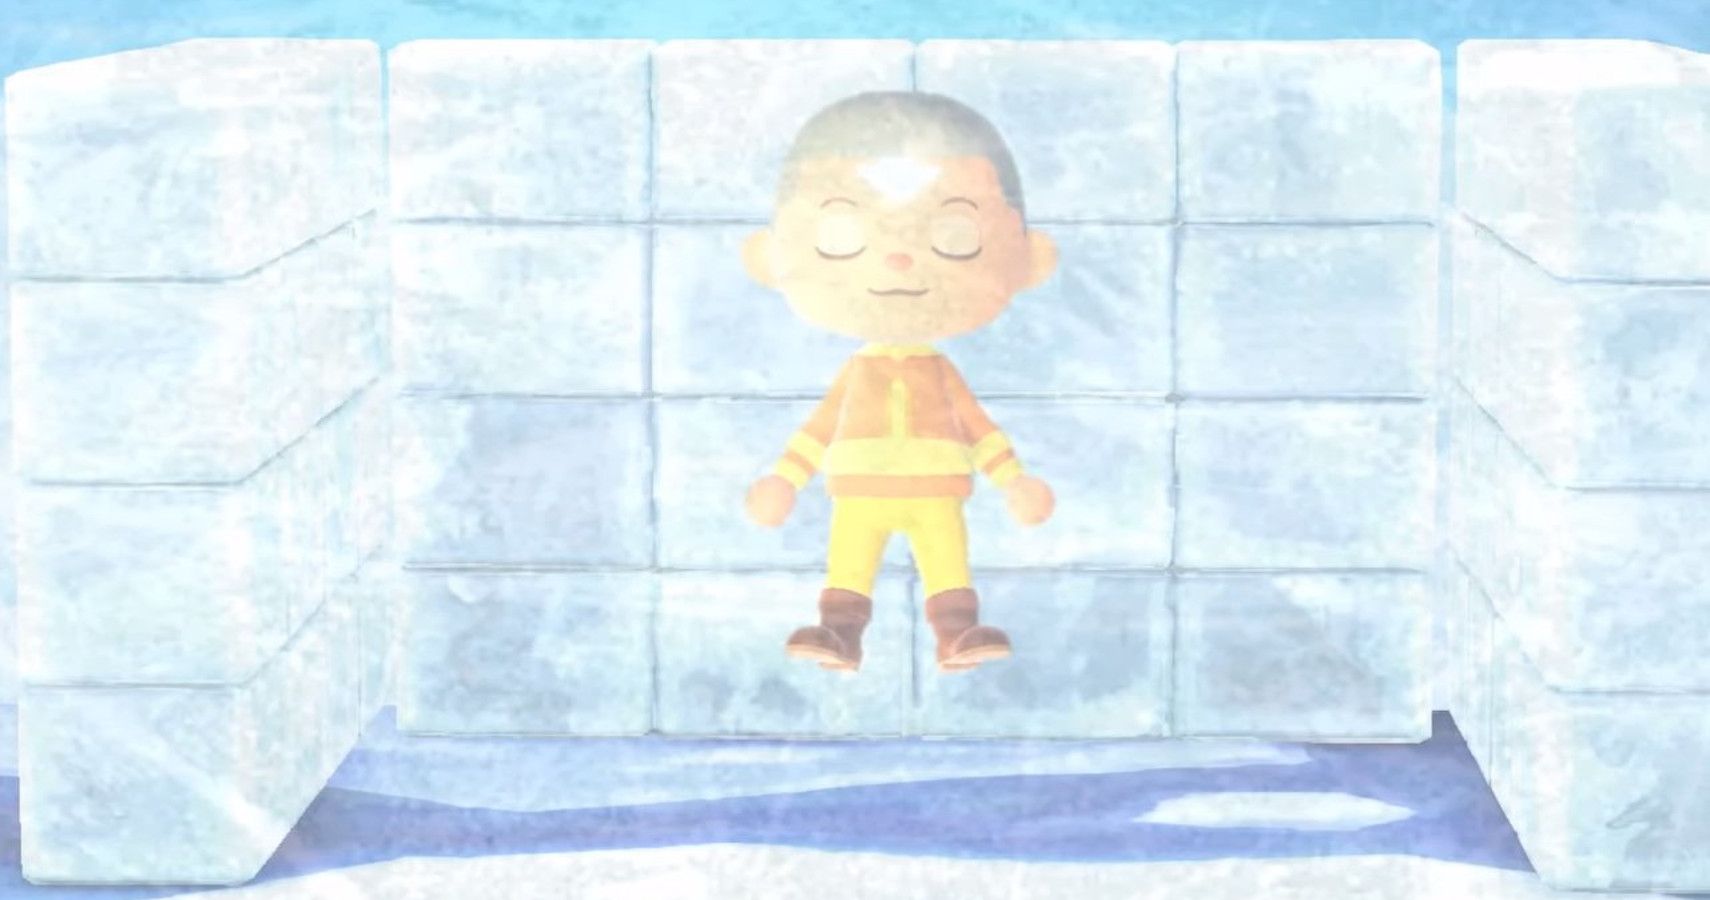 Animal Crossing New Horizons  Codes for Avatar The Last Airbender Outfits